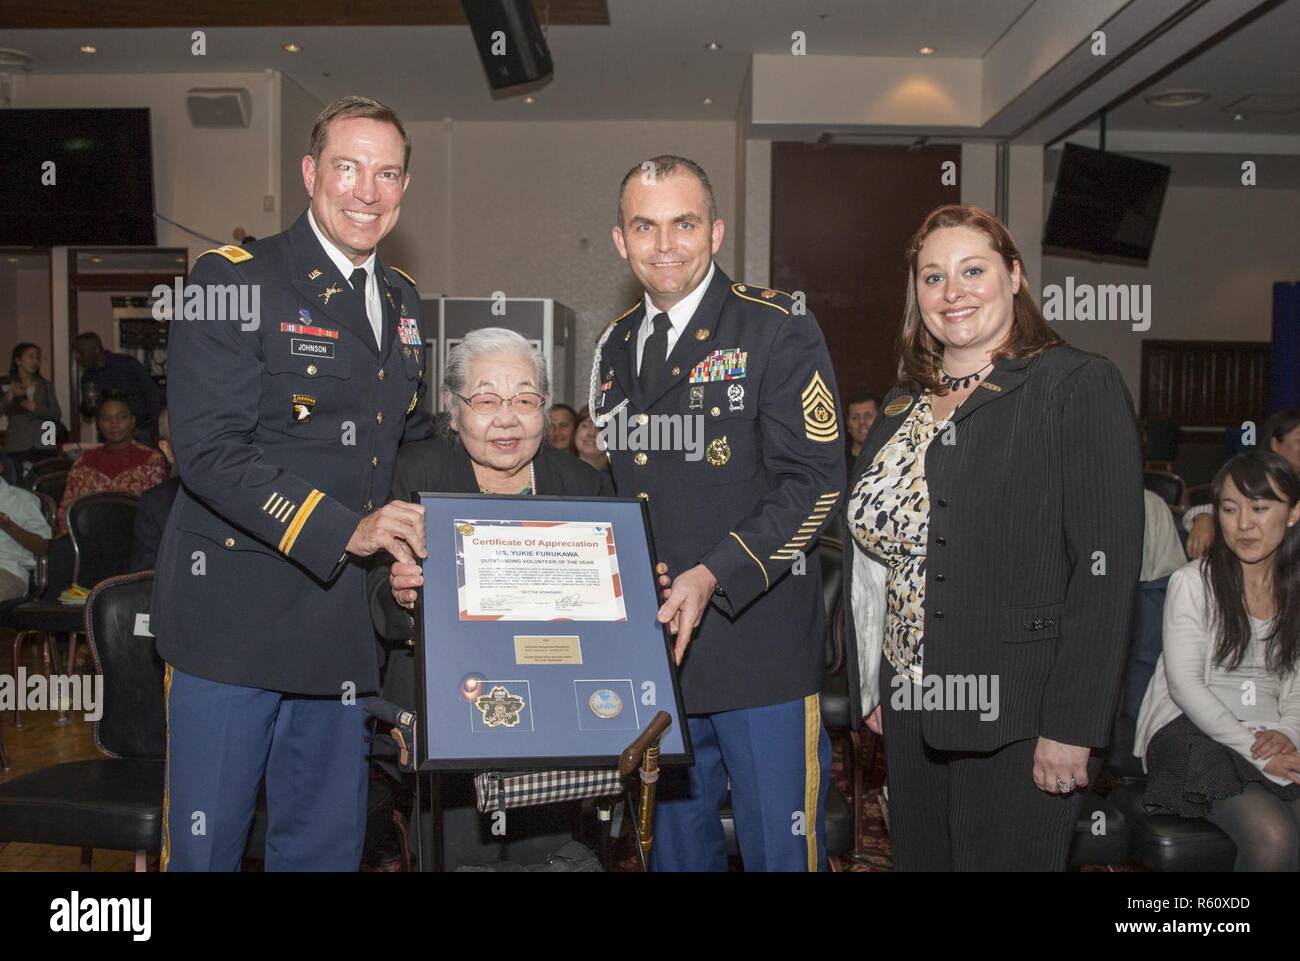 Yukie Furukawa, named Outstanding Volunteer of the Year, receives a plaque during Camp Zama's annual Volunteer Recognition Ceremony April 21 at the Camp Zama Community Club. Stock Photo